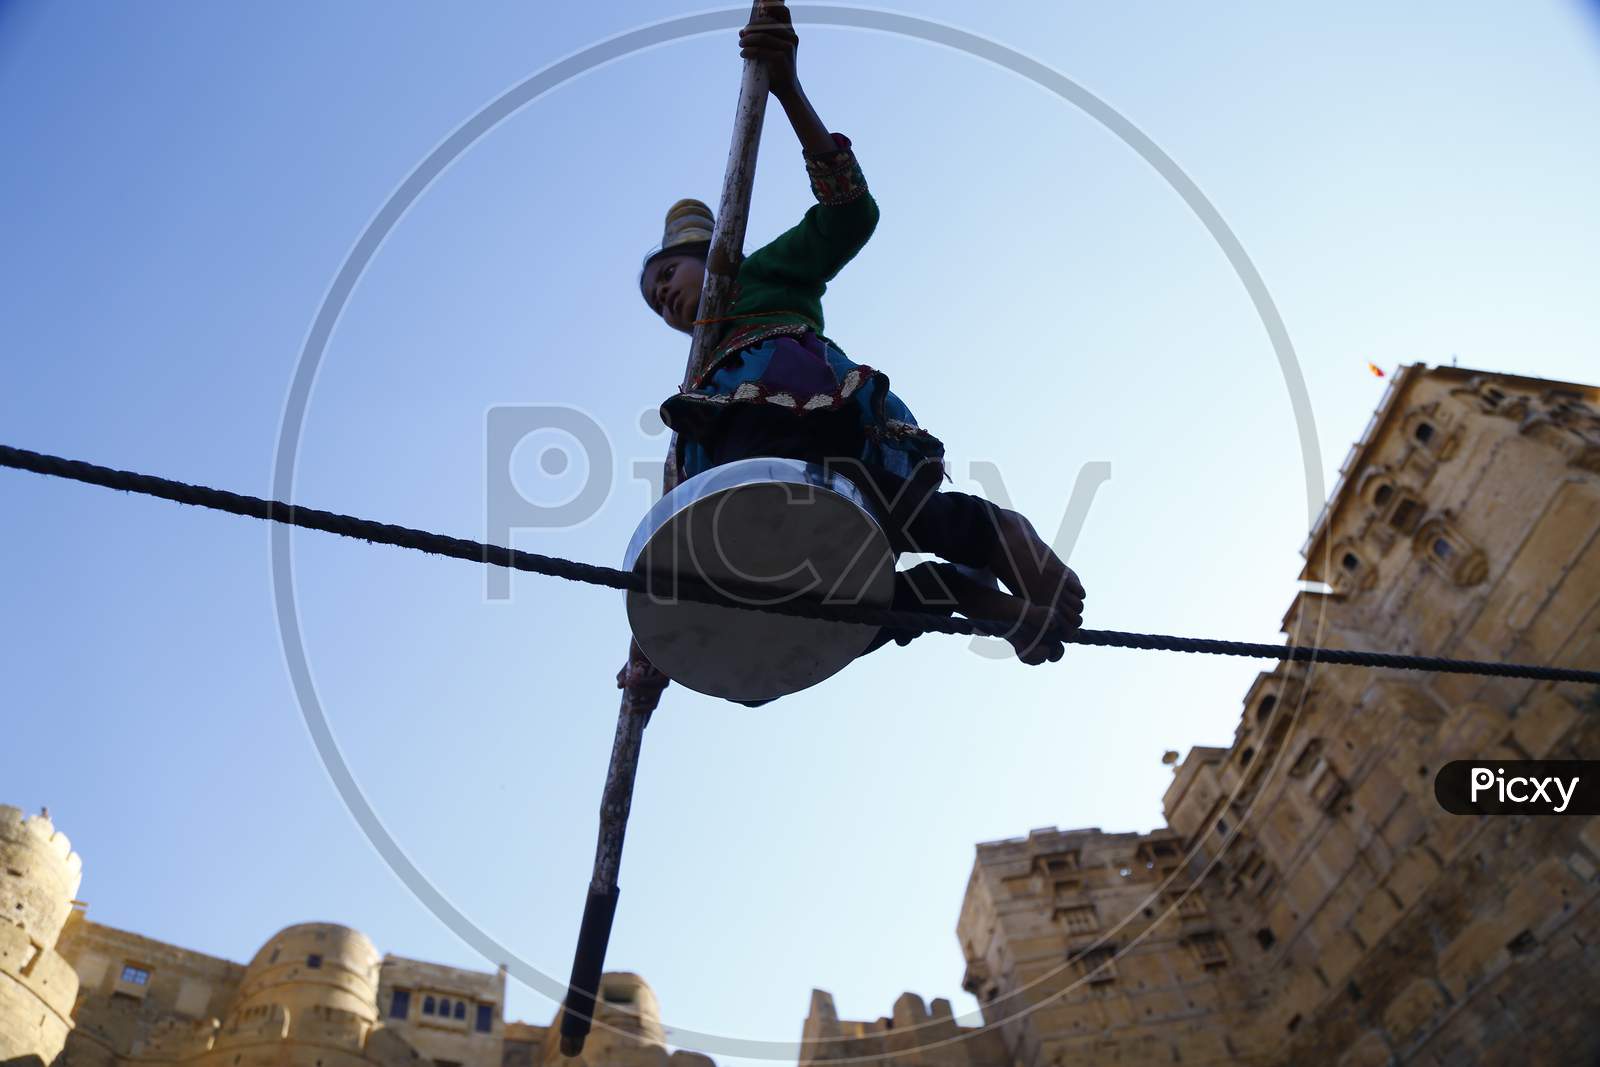 An unidentified Indian girl performs street acrobatics by walking the rope during the Desert Festival in Jaisalmer, Rajasthan, India.